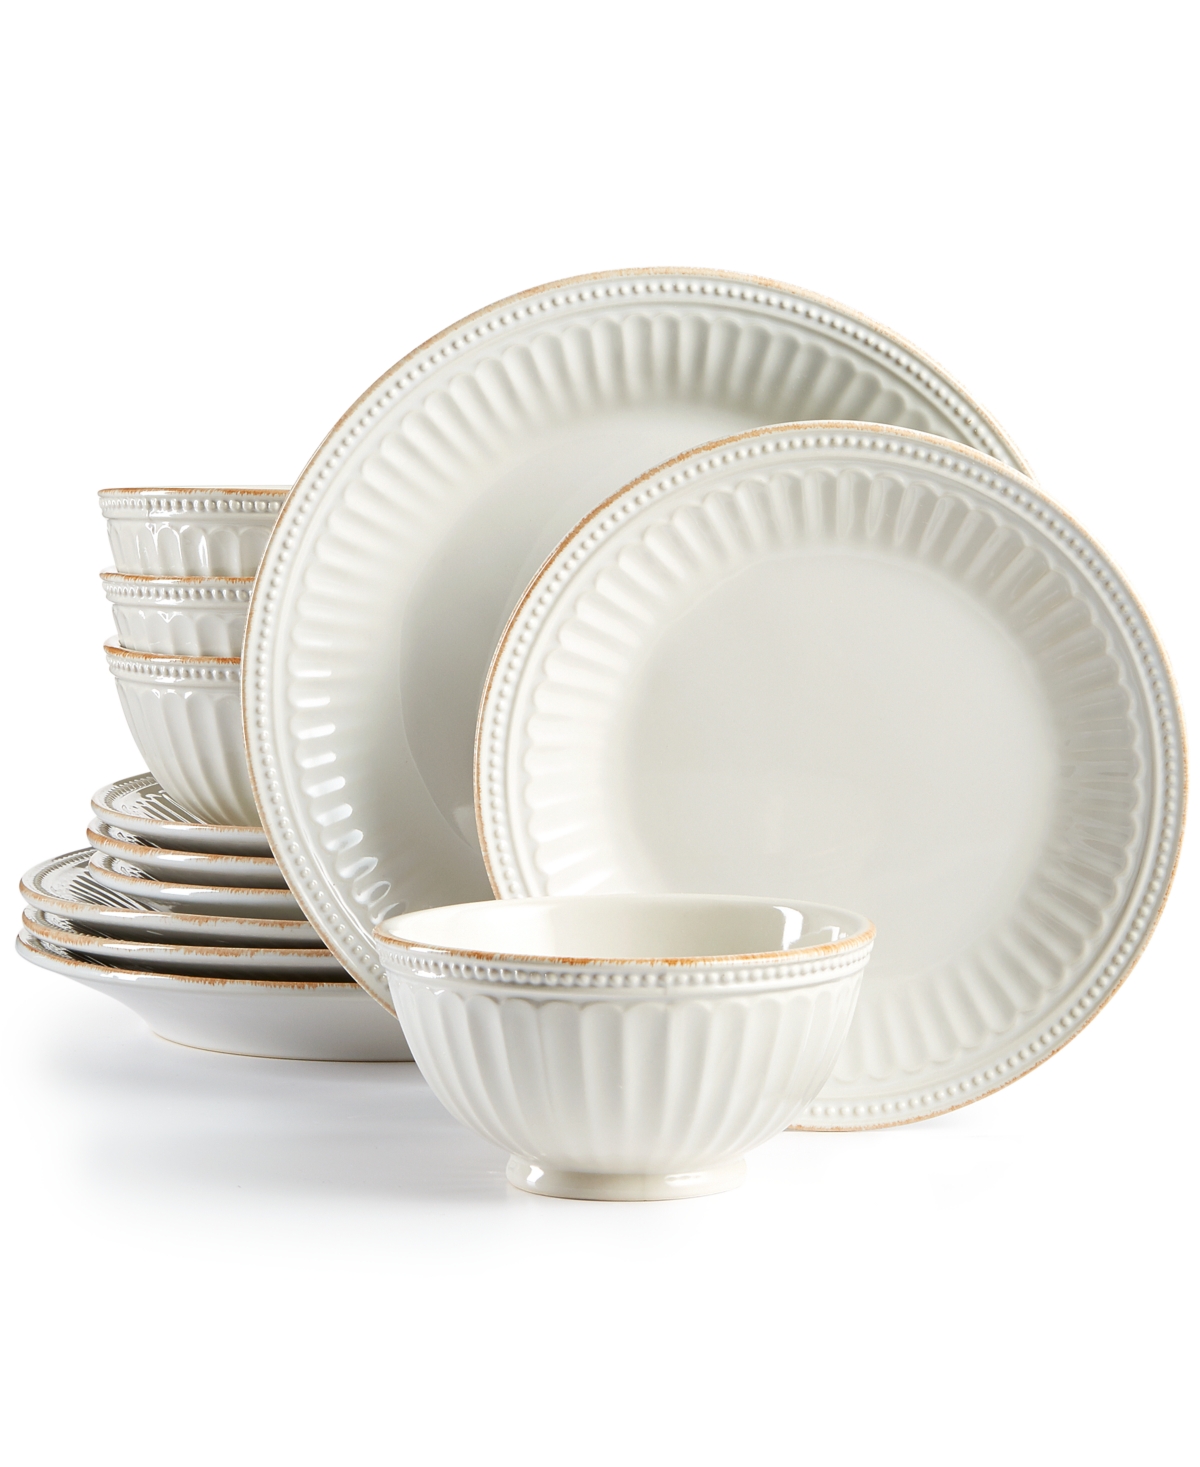 French Perle Groove Blue 12 Pc. Dinnerware Set, Service for 4, Created for Macy's - White